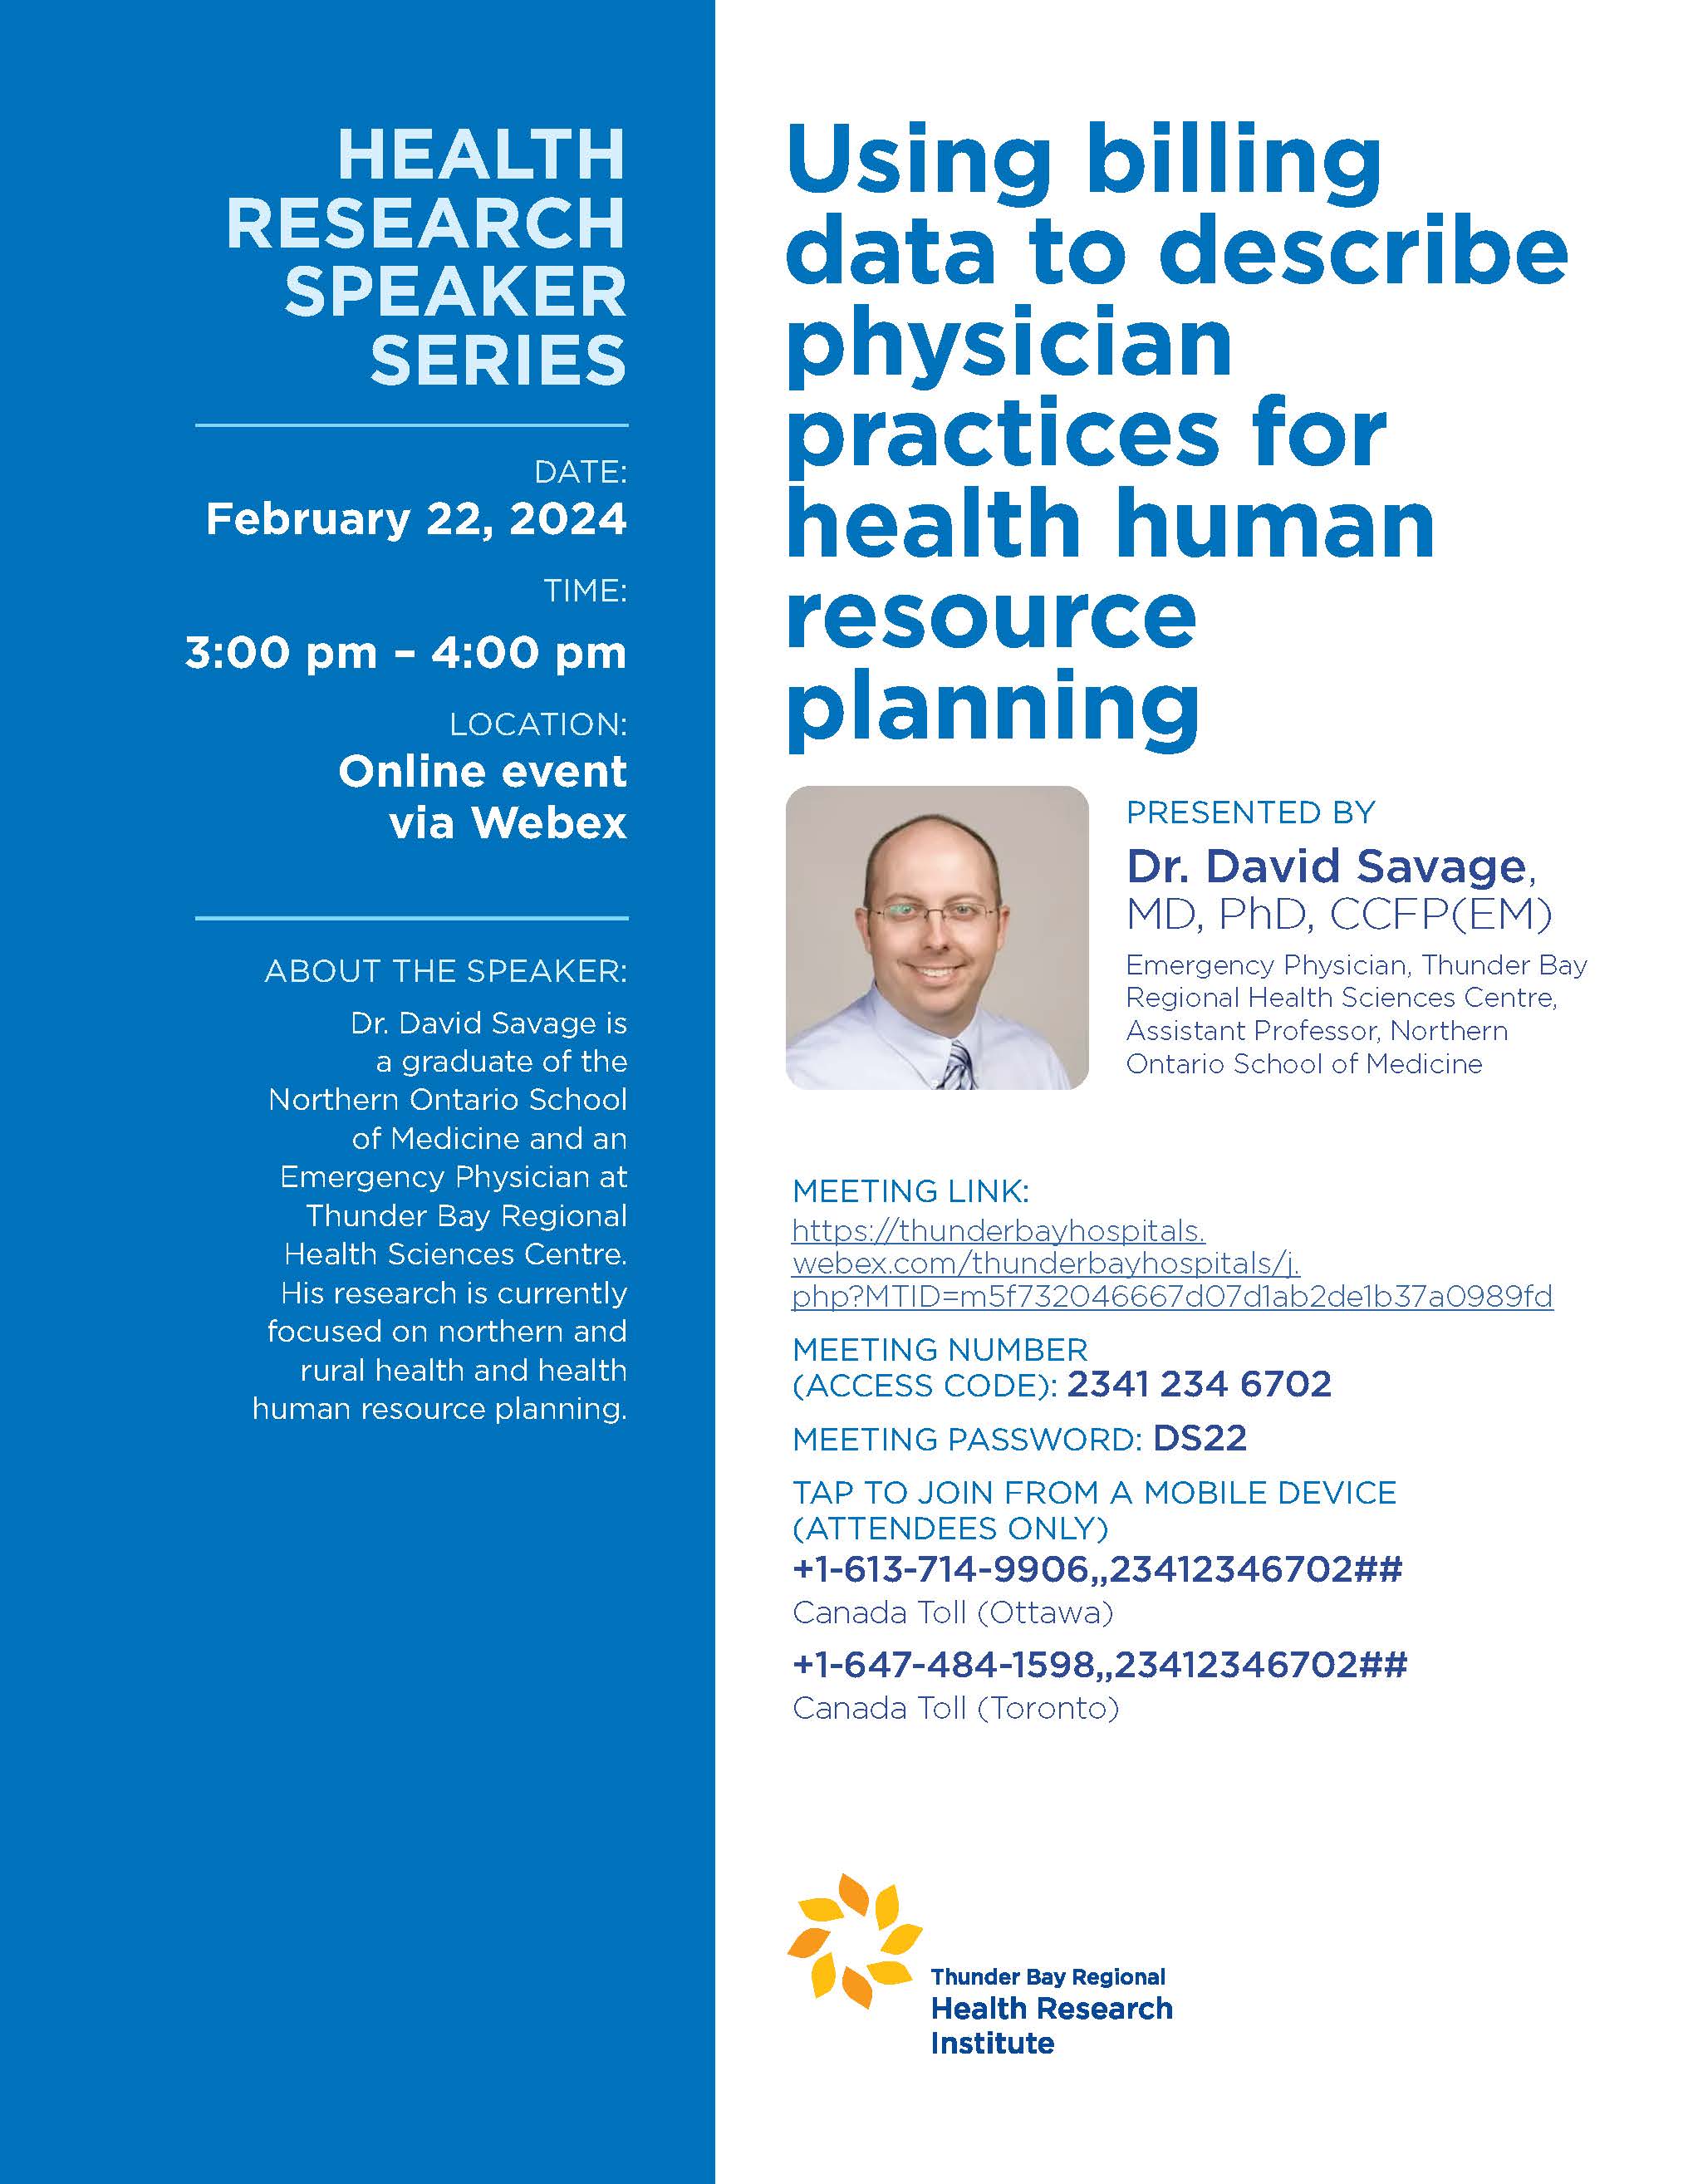 Event Poster:  Thunder Bay Regional Health Research Institute Health Research Speaker Series: "Using Billing Data to Describe Physician Practices for Health Human Resource Planning"